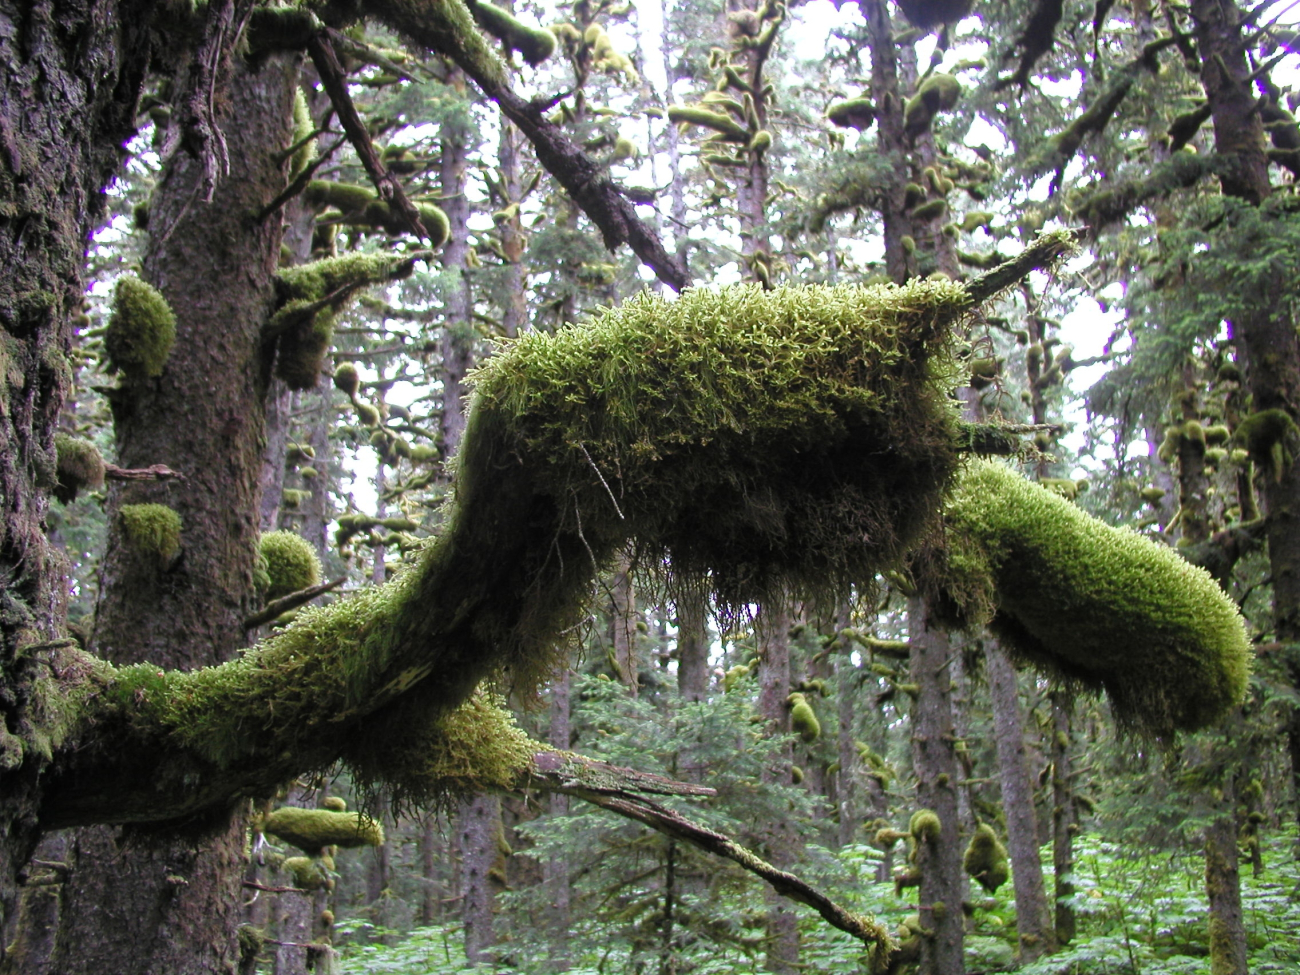 Moss covering tree limbs in the rain forest environment of Spruce Island